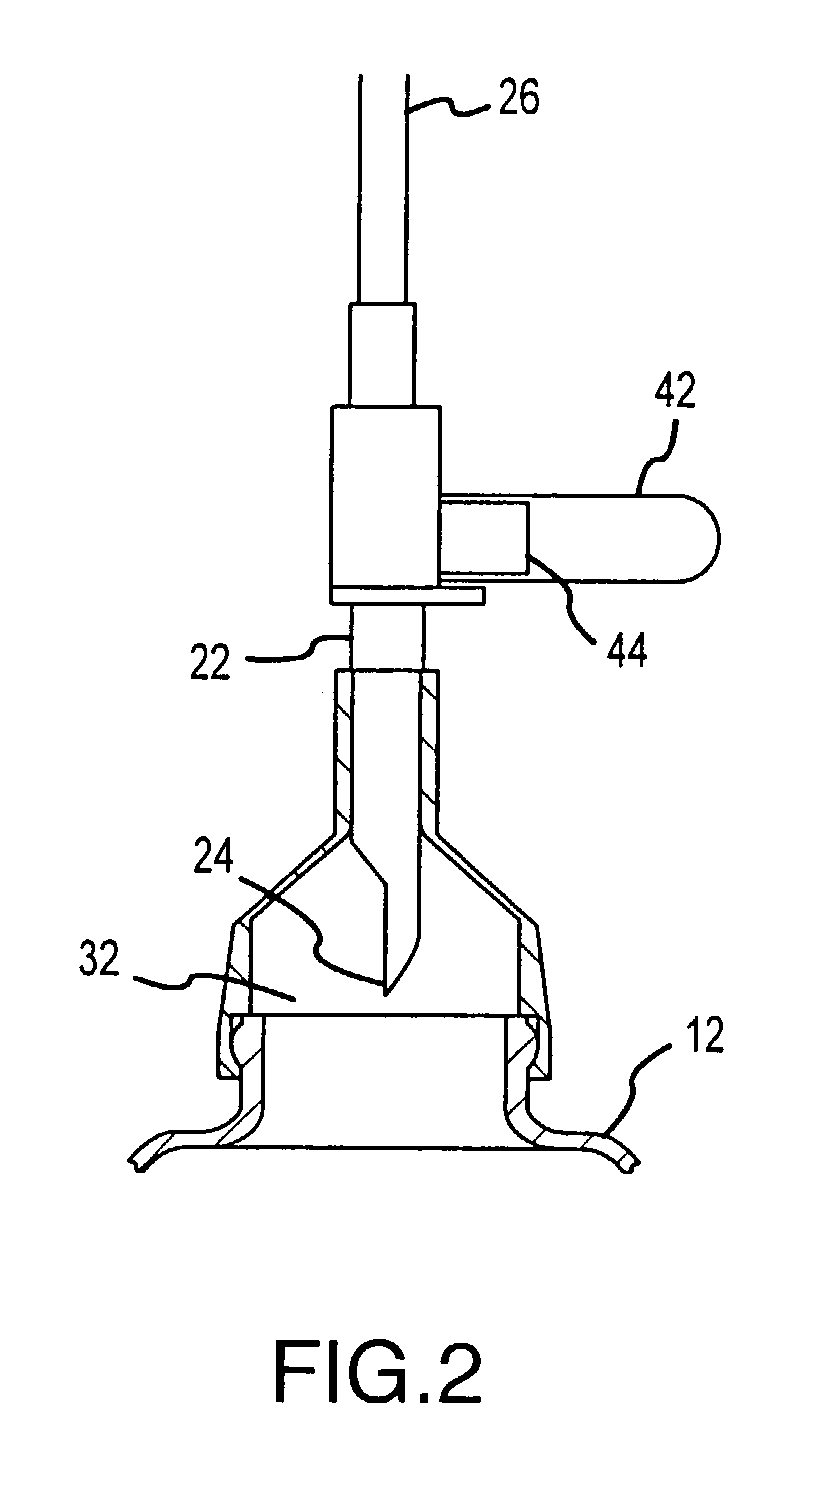 Device for withdrawing body fluids